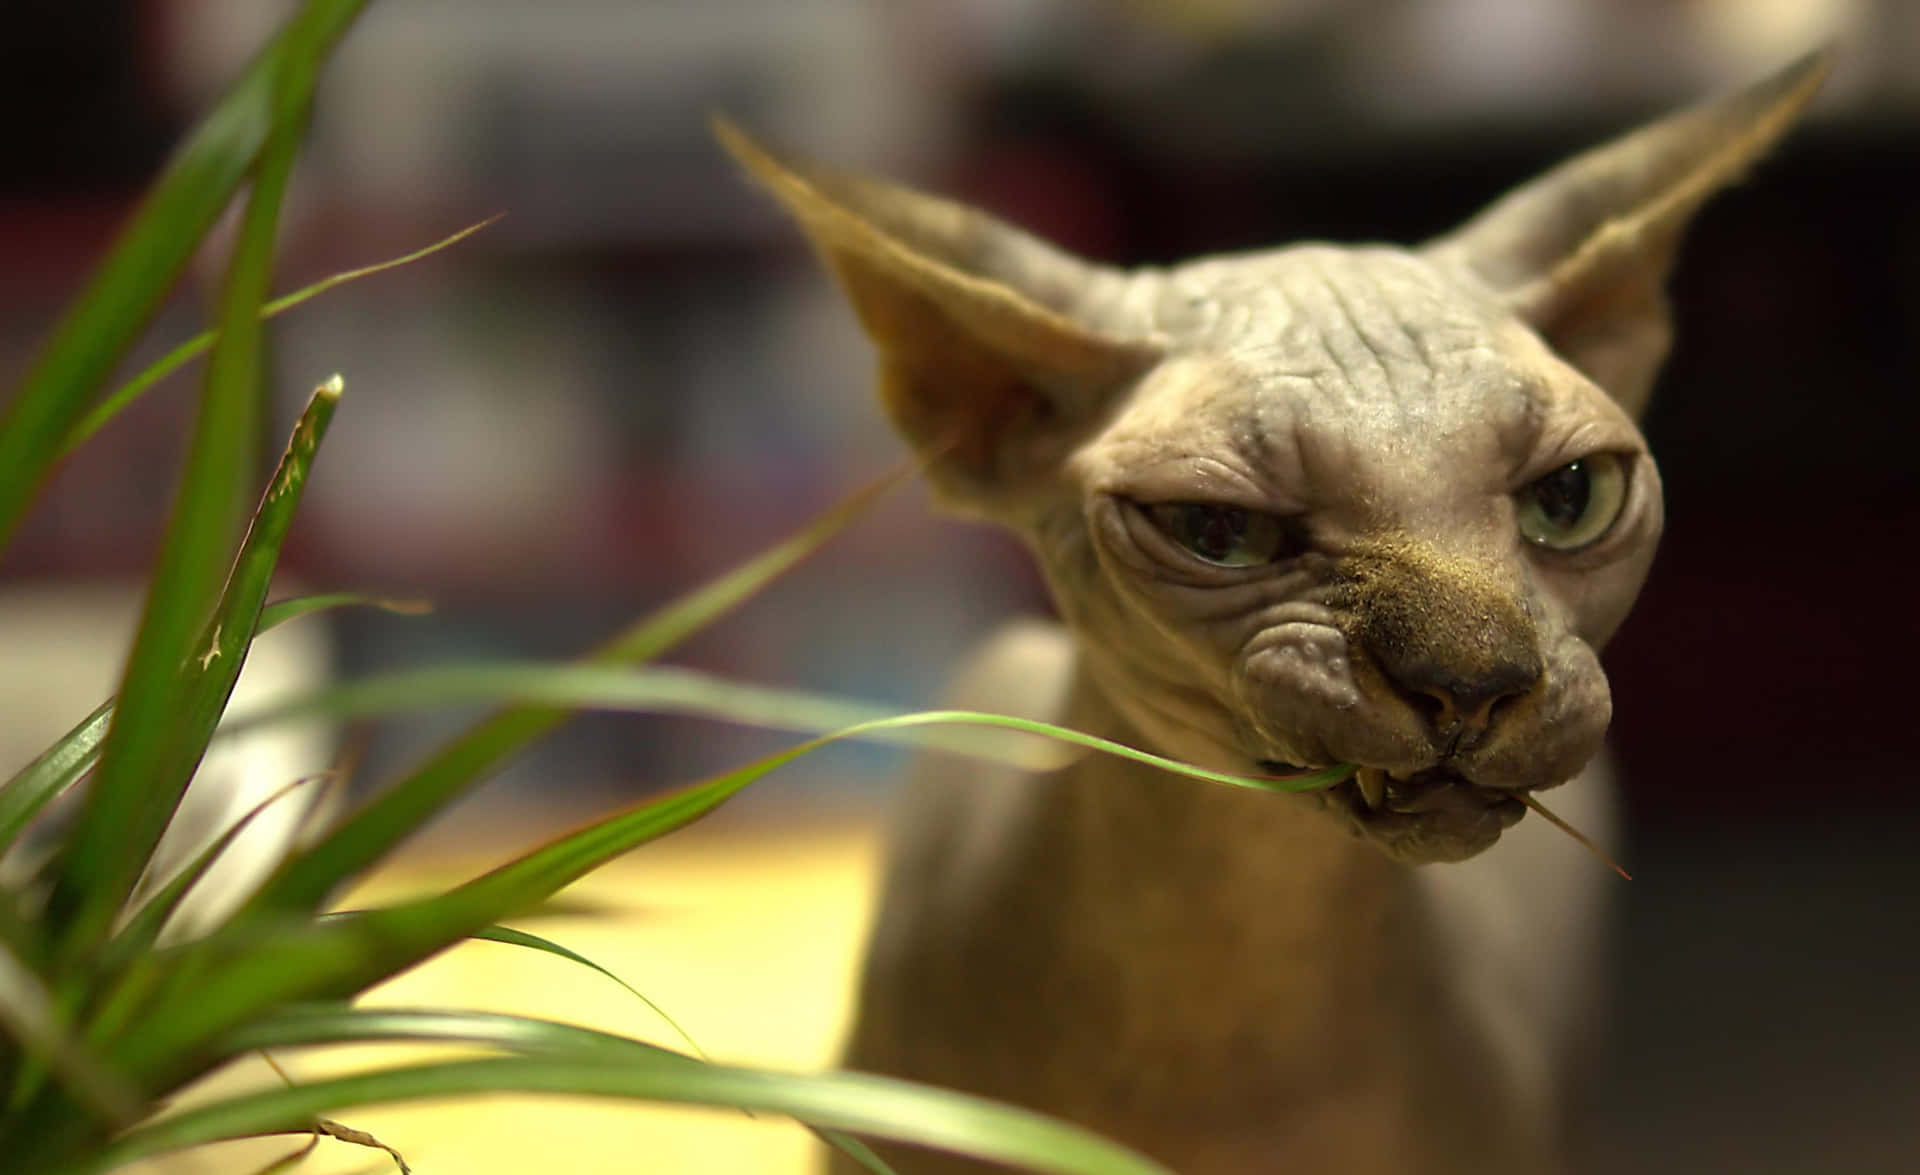 A hairless Sphynx cat gazing intently with its mesmerizing green eyes Wallpaper